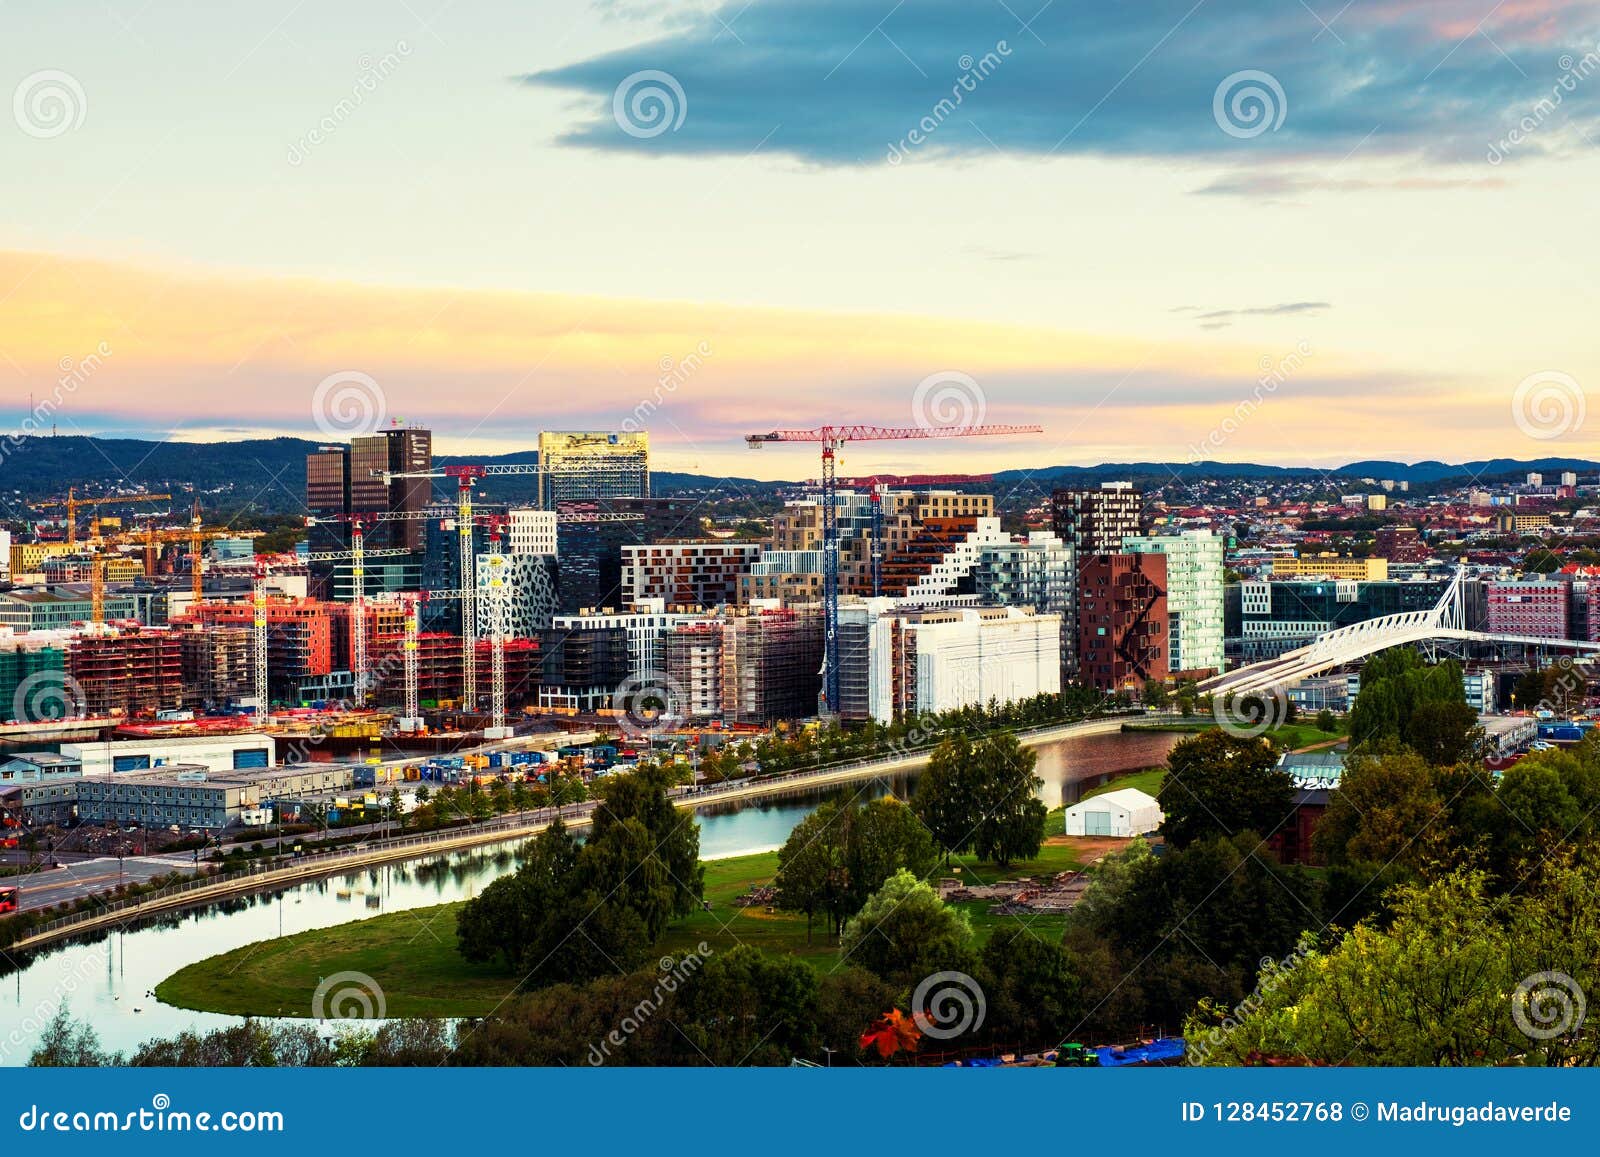 a morning view of sentrum area of oslo, norway, with barcode buildings